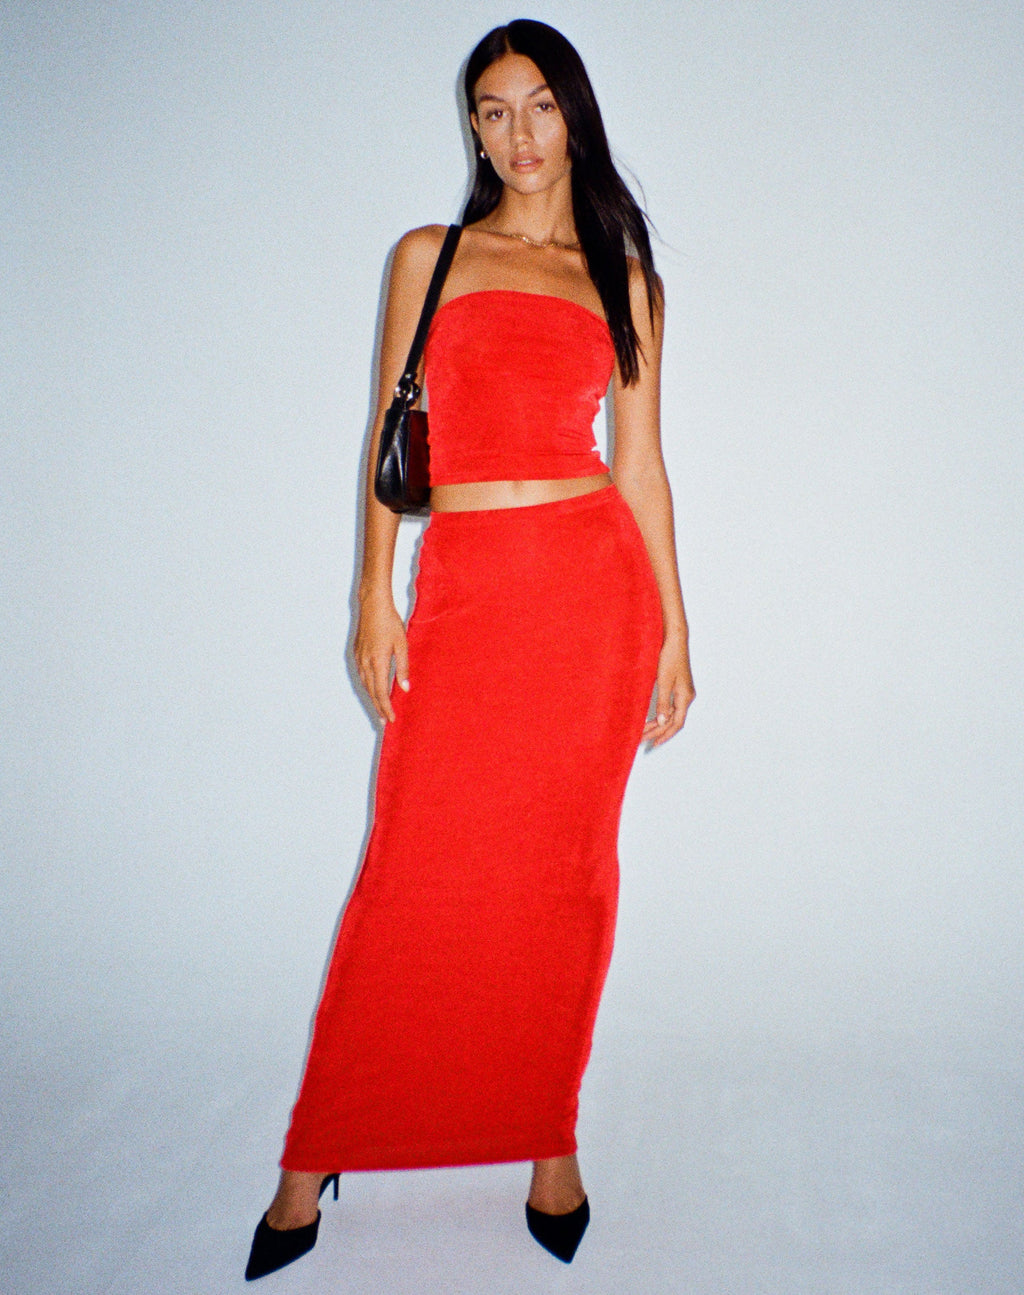 New Tulus Flood Maxi Skirt in Red